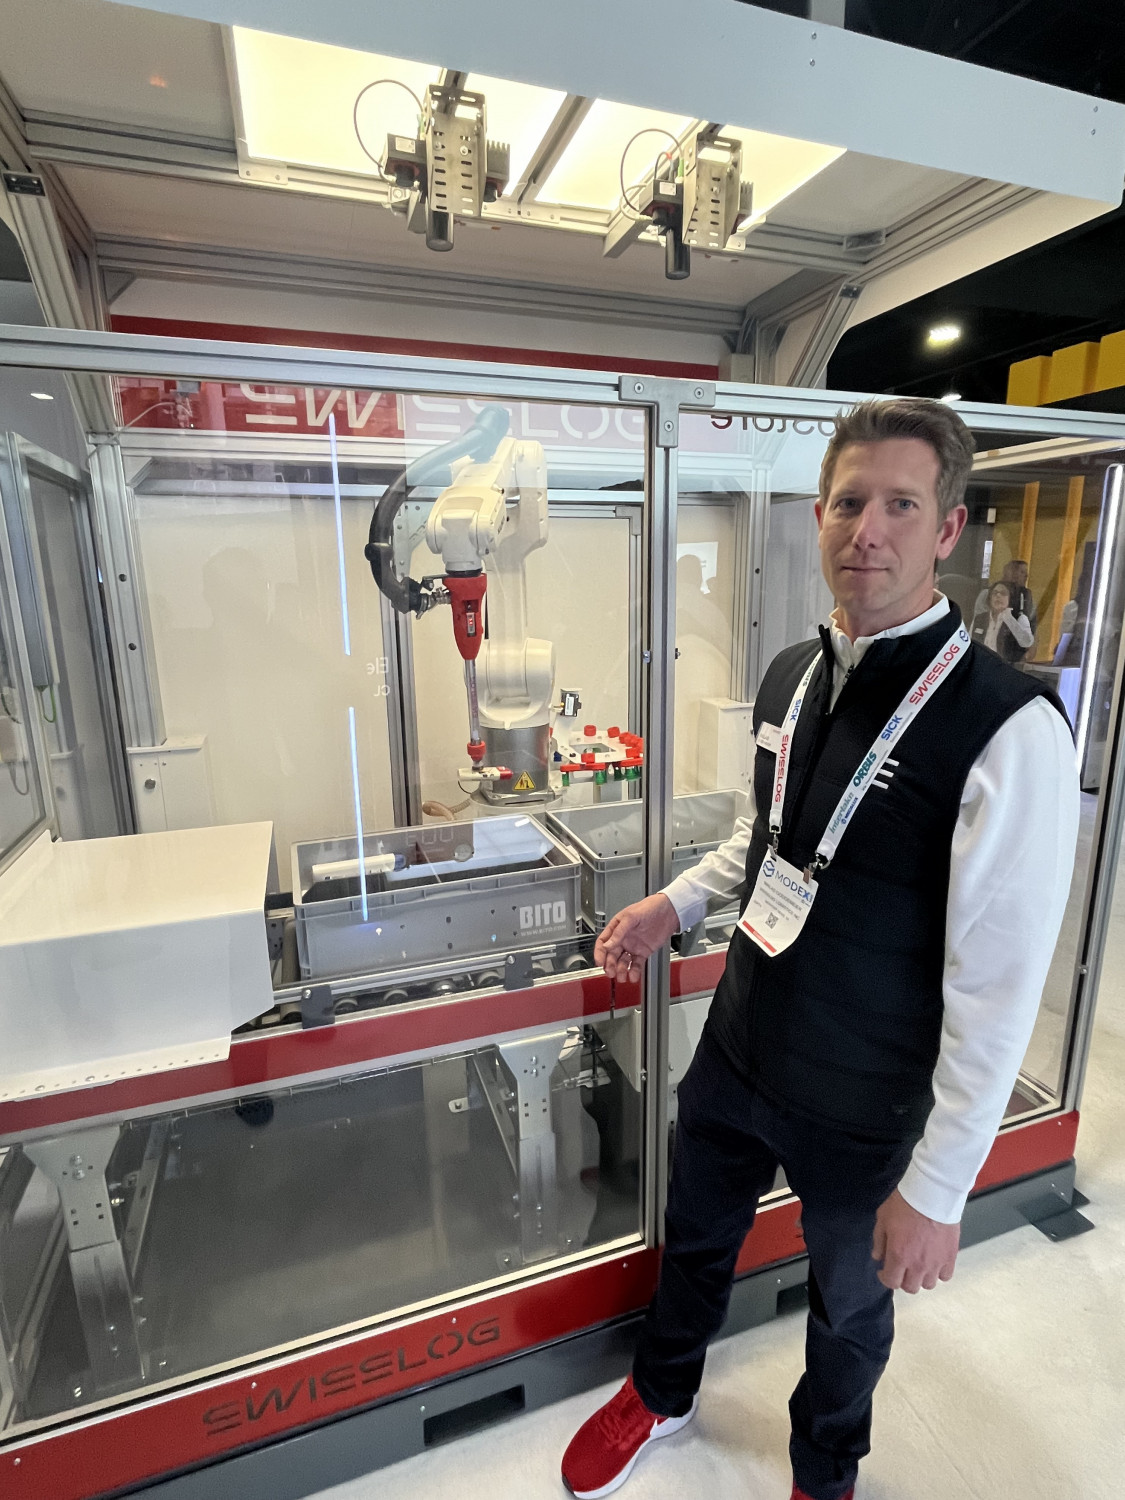 Niklas Goddemeier, head of Research and Development RTC, Swisslog, with the company’s ItemPiQ intelligent piece picking demonstration.